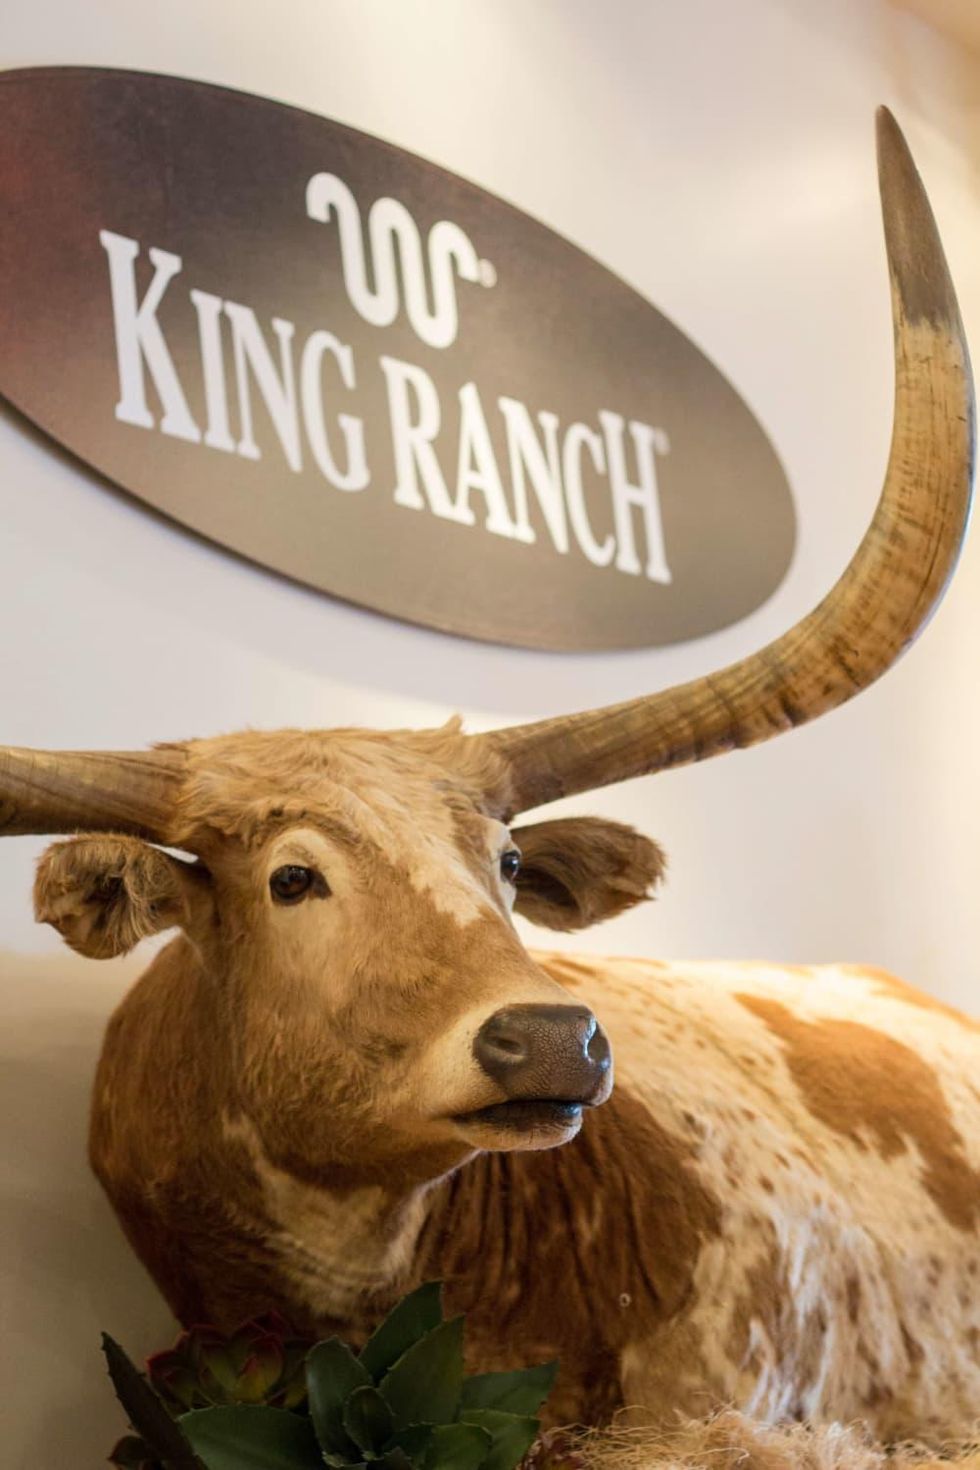 https://houston.culturemap.com/media-library/king-ranch-saddle-shop-in-houston-august-2016.jpg?id=31646018&width=980